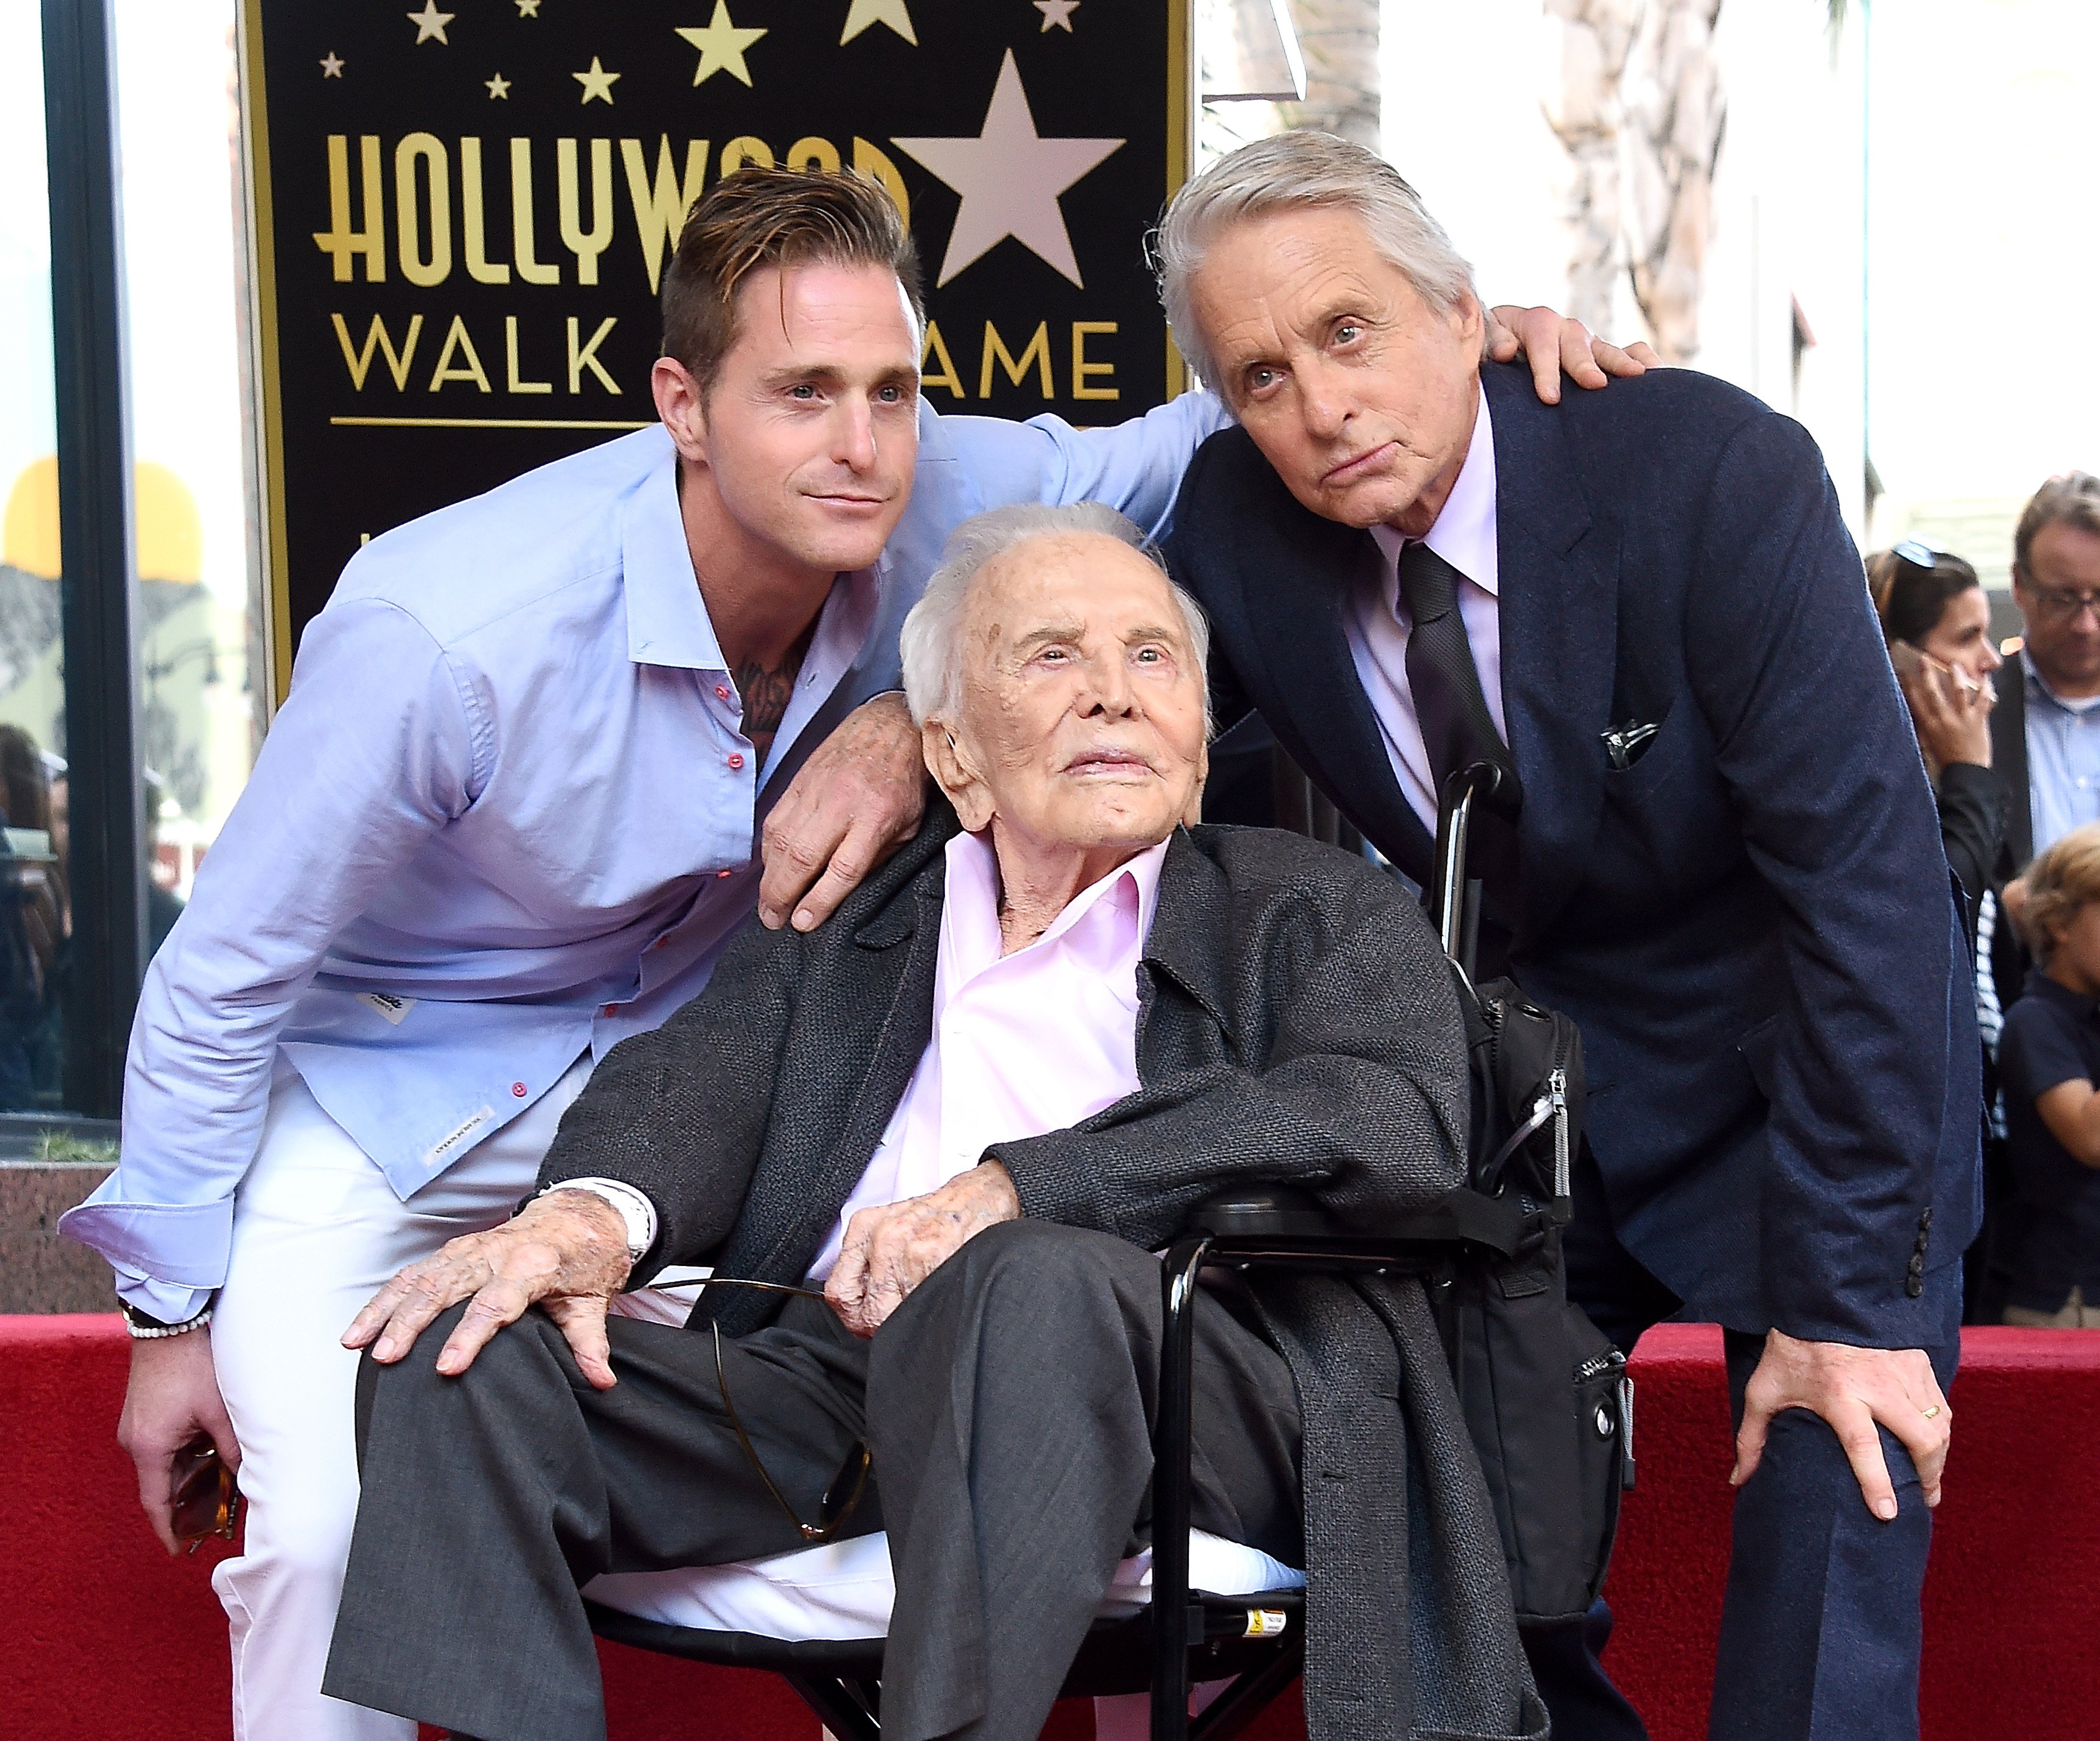 Cameron Douglas, Kirk Douglas, and Michael Douglas pose at The Hollywood Walk Of Fame ceremony on November 6, 2018, in Hollywood, California. | Source: Getty Images.